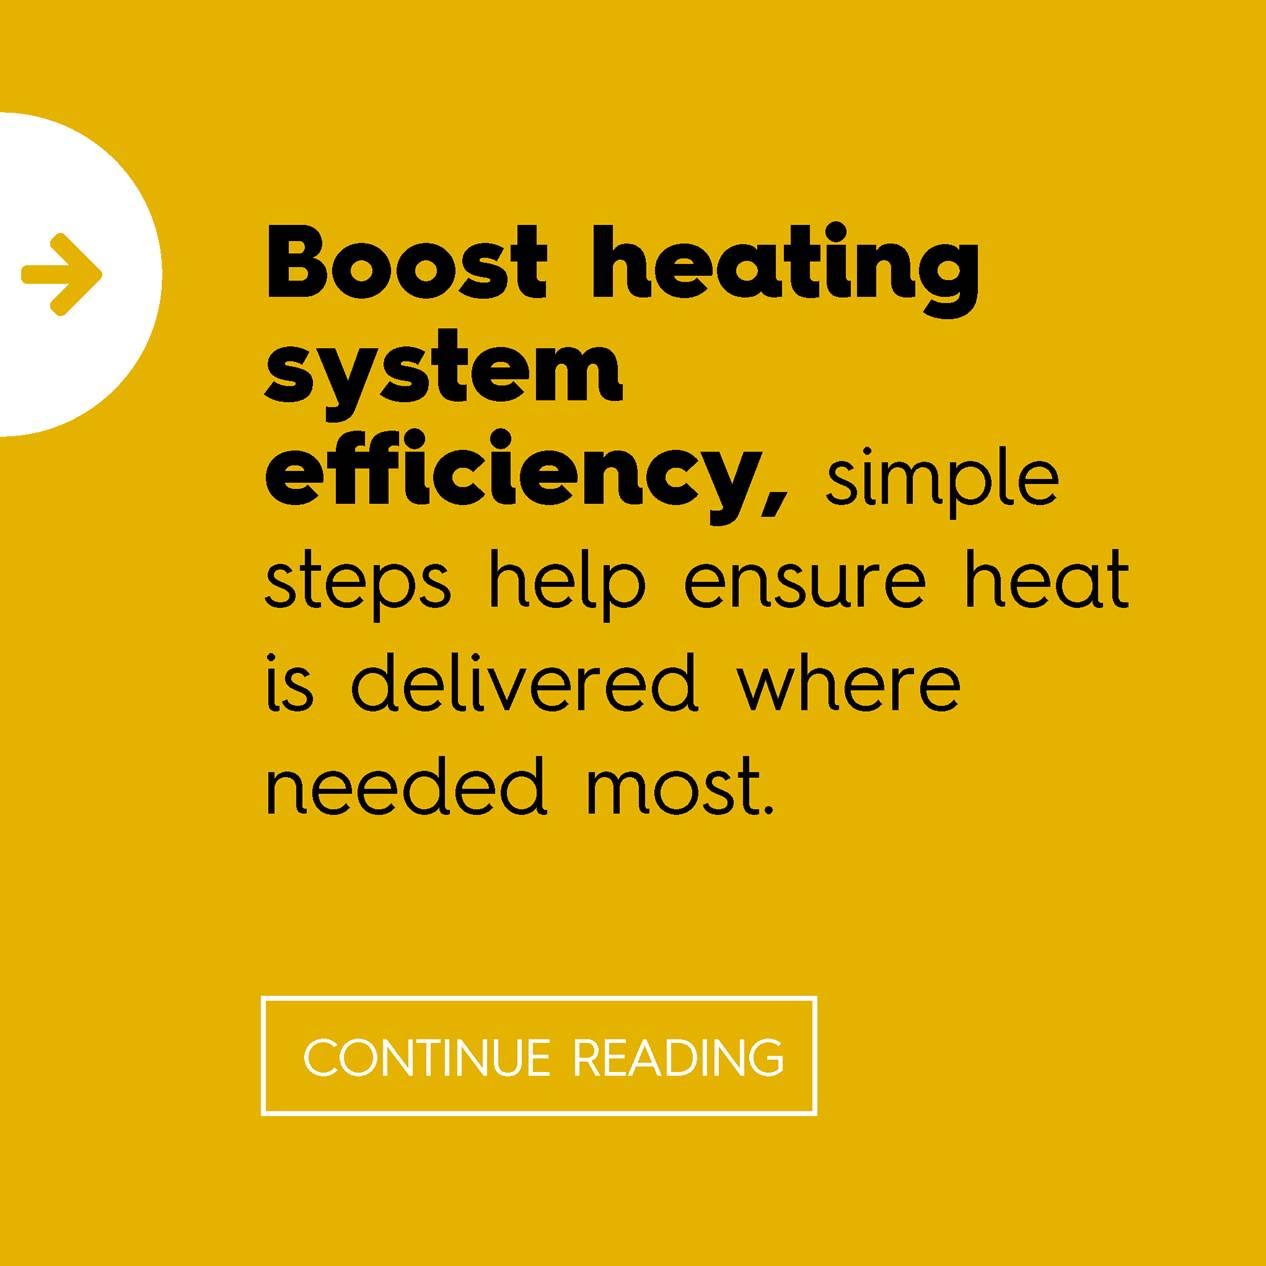 Boost heating system efficiency